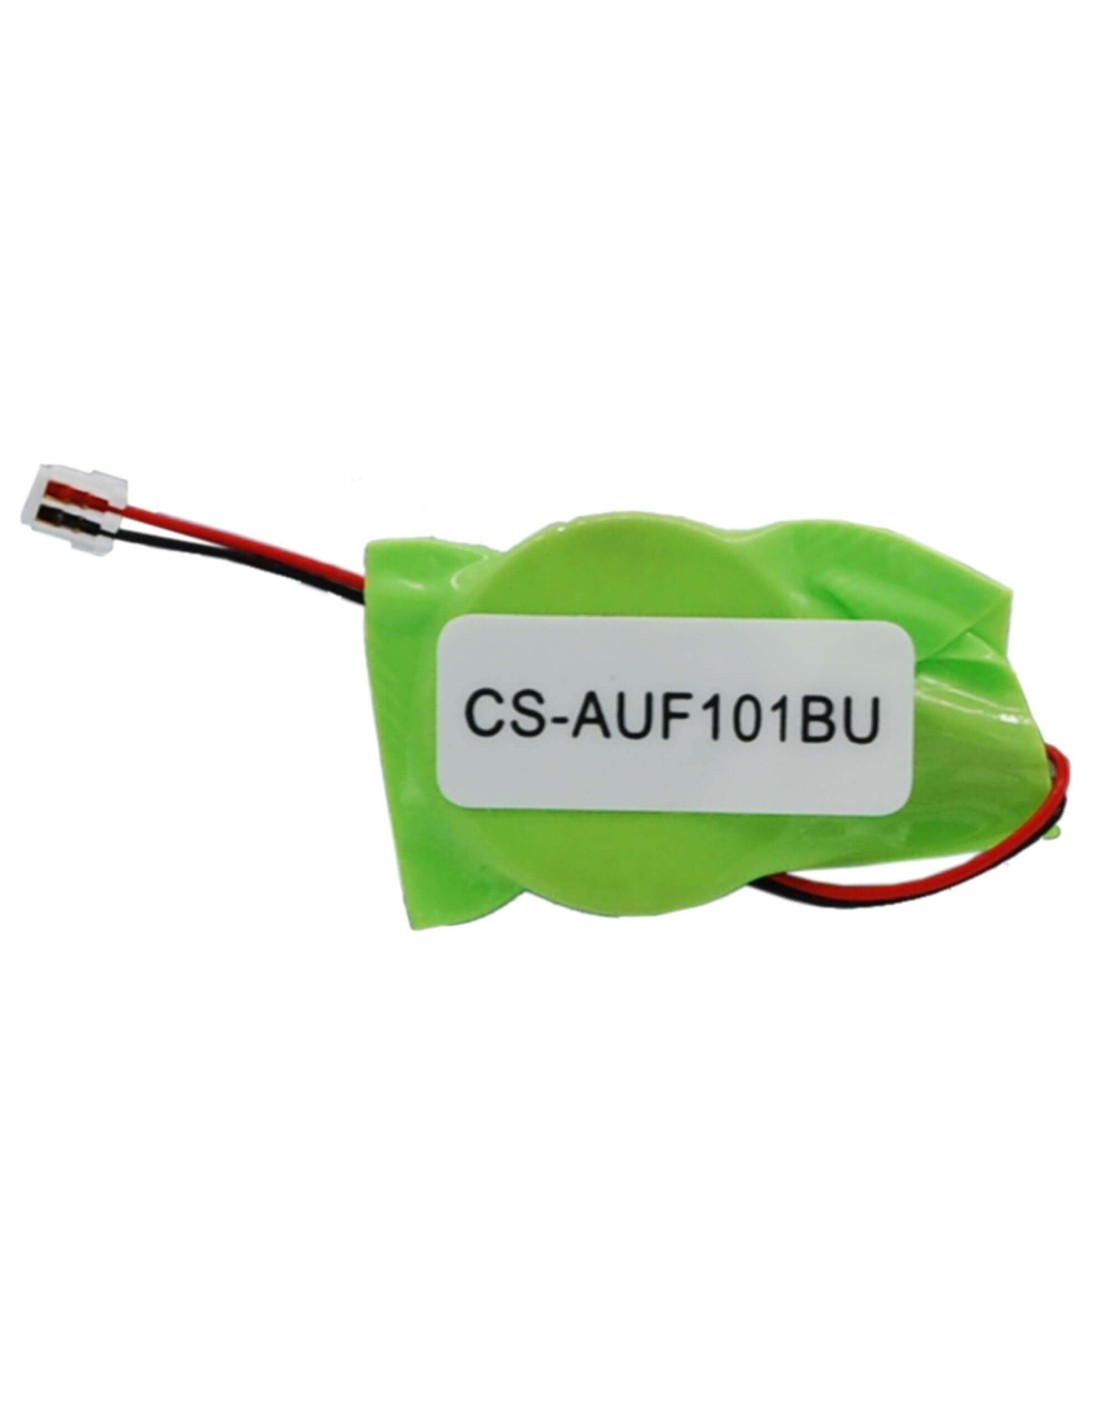 Battery for Asus Eee Transformer Tf101, Eee Pad Transformer Tr101 Prefix, Eee Pad Transformer Tf101 Prefix Mobile Docking 3.0V, 